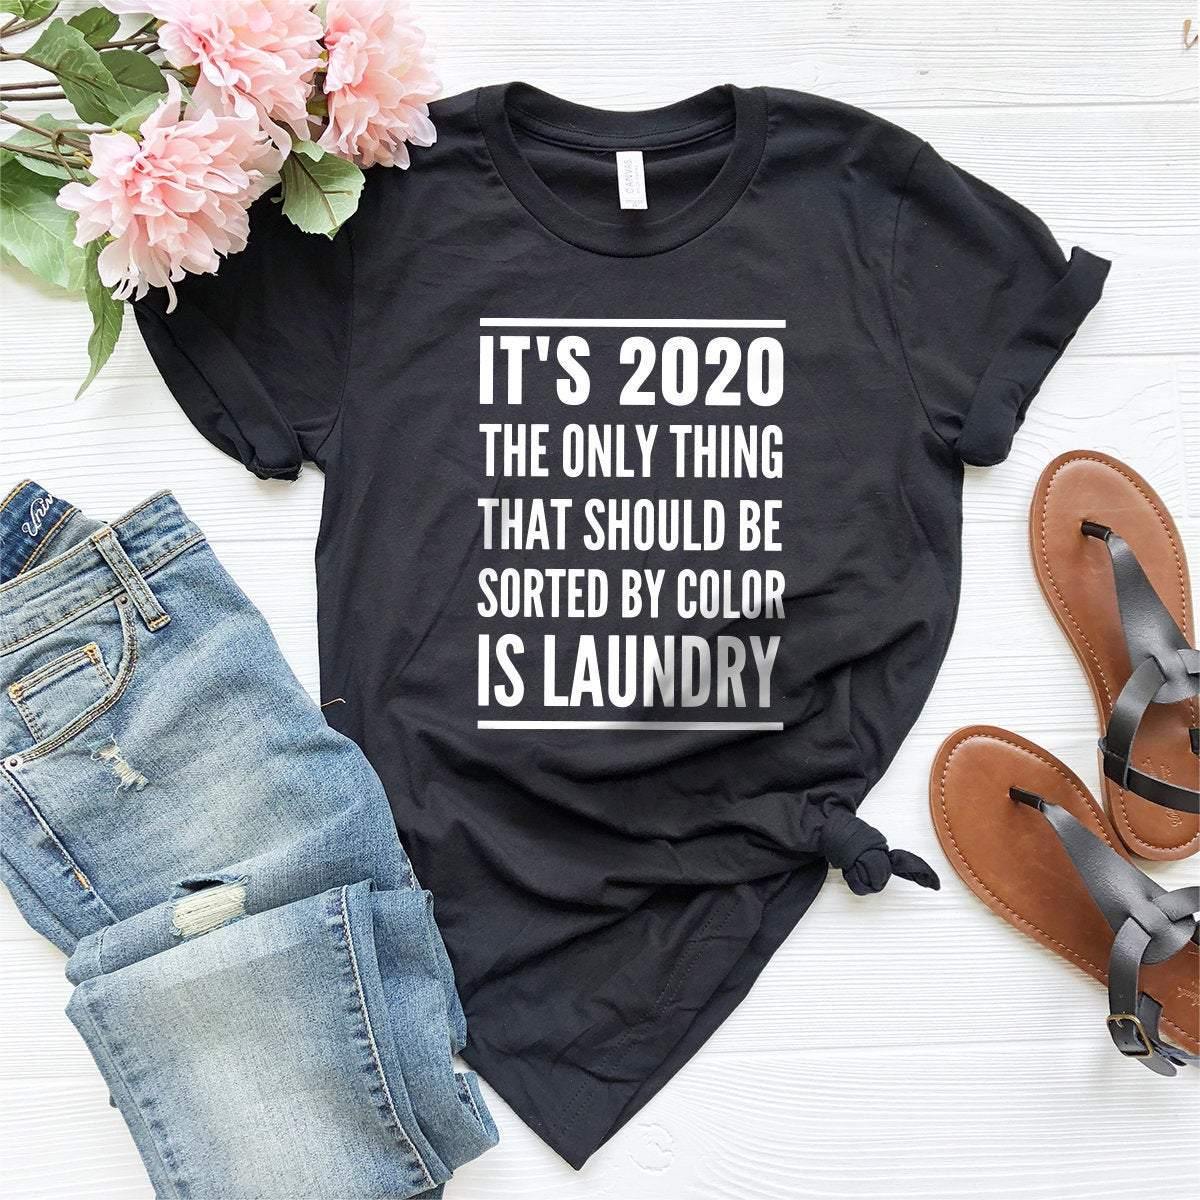 Black Culture Shirt, Black Power T-Shirt, Black Lives Matter Tee, It's 2020 The Only Thing That Should Be Sorted By Color Is Laundry Tee - Fastdeliverytees.com